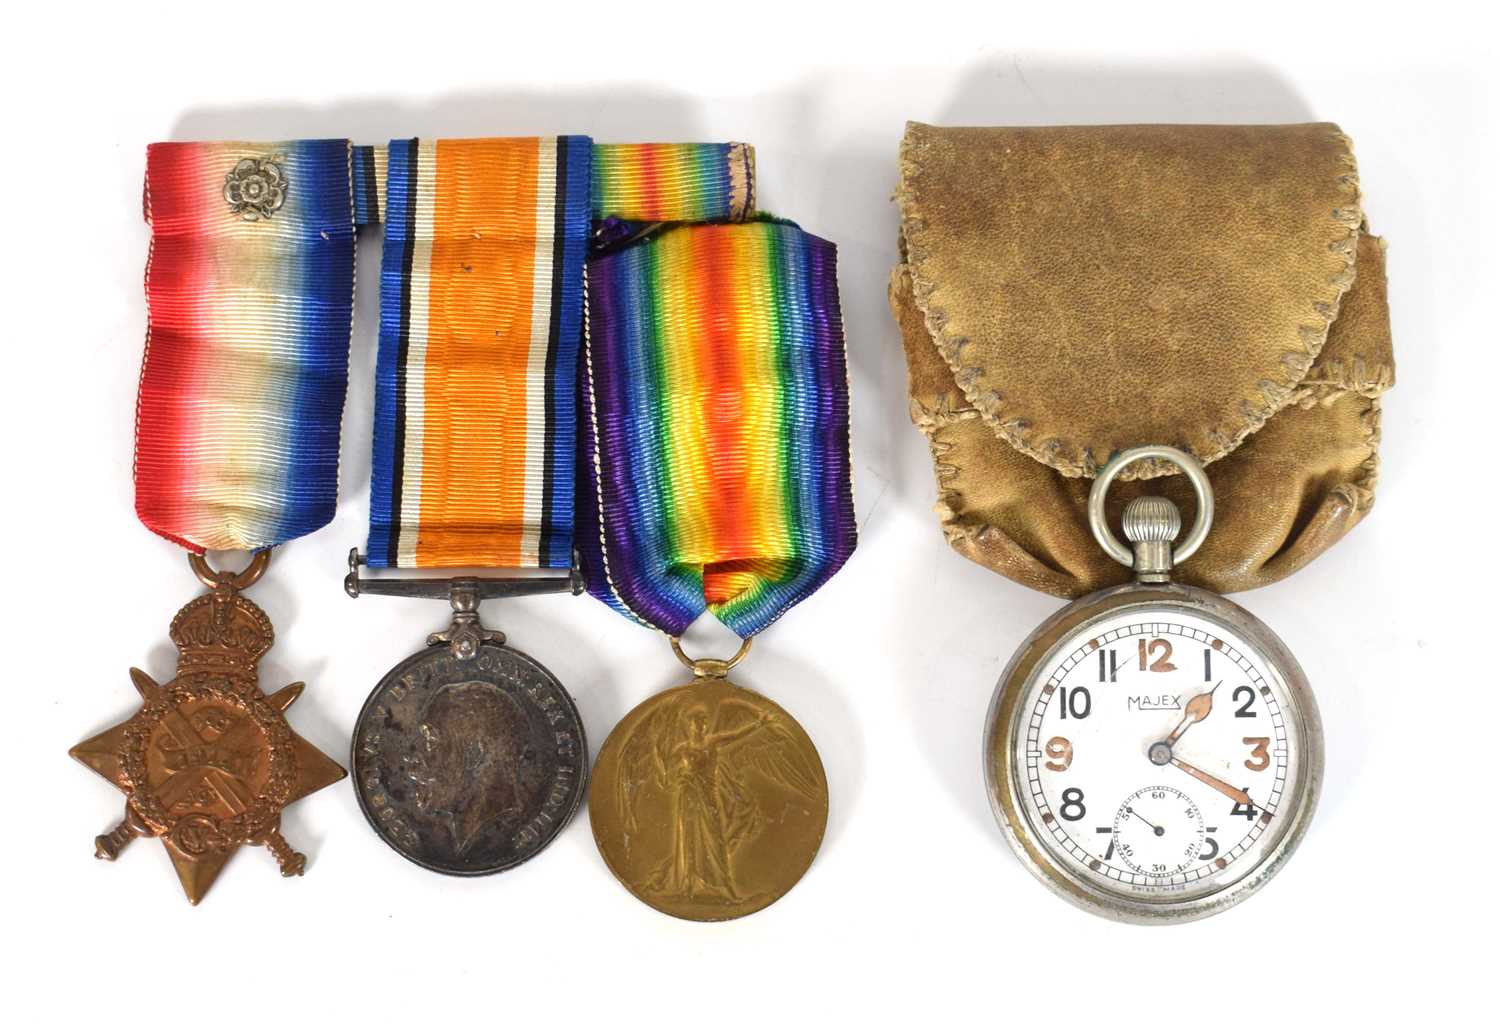 A trio of First World War medals including a 1914 Volunteer Star awarded to 68 Private/Corporal W. - Image 2 of 5